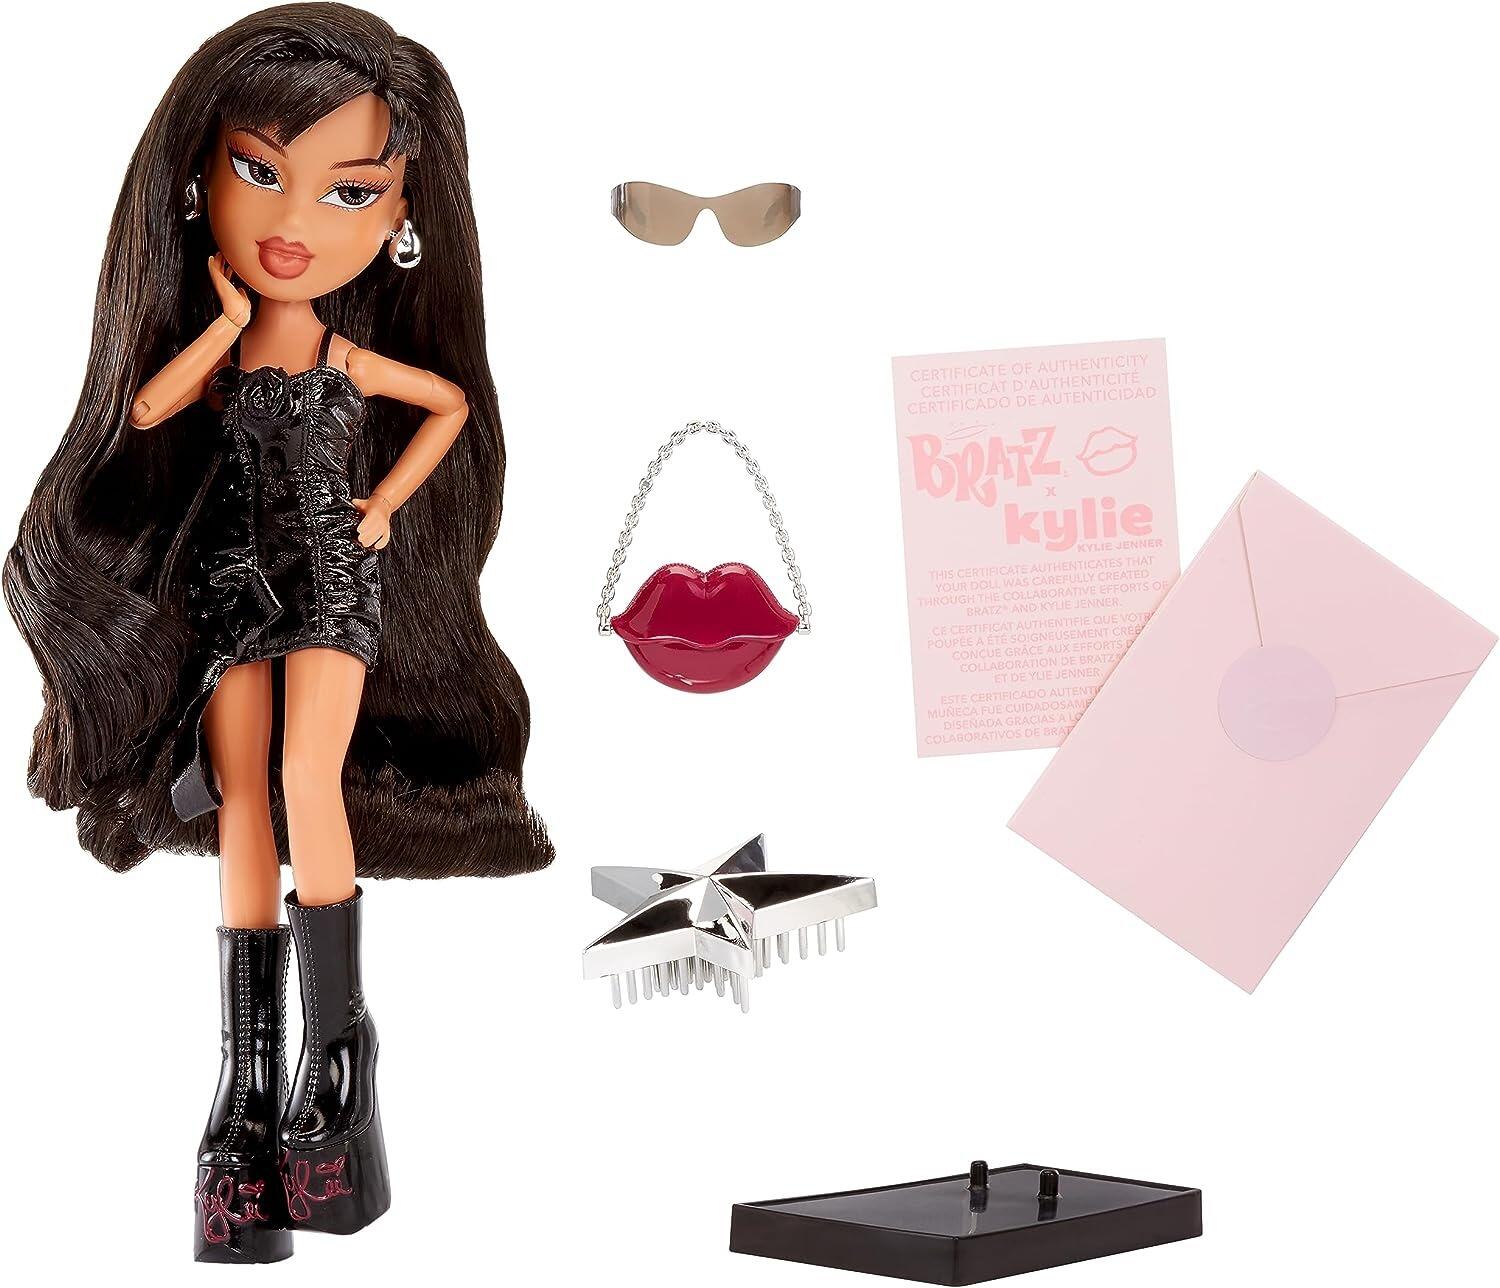 Bratz x Kylie Jenner Day Fashion Doll with Accessories and Poster ...